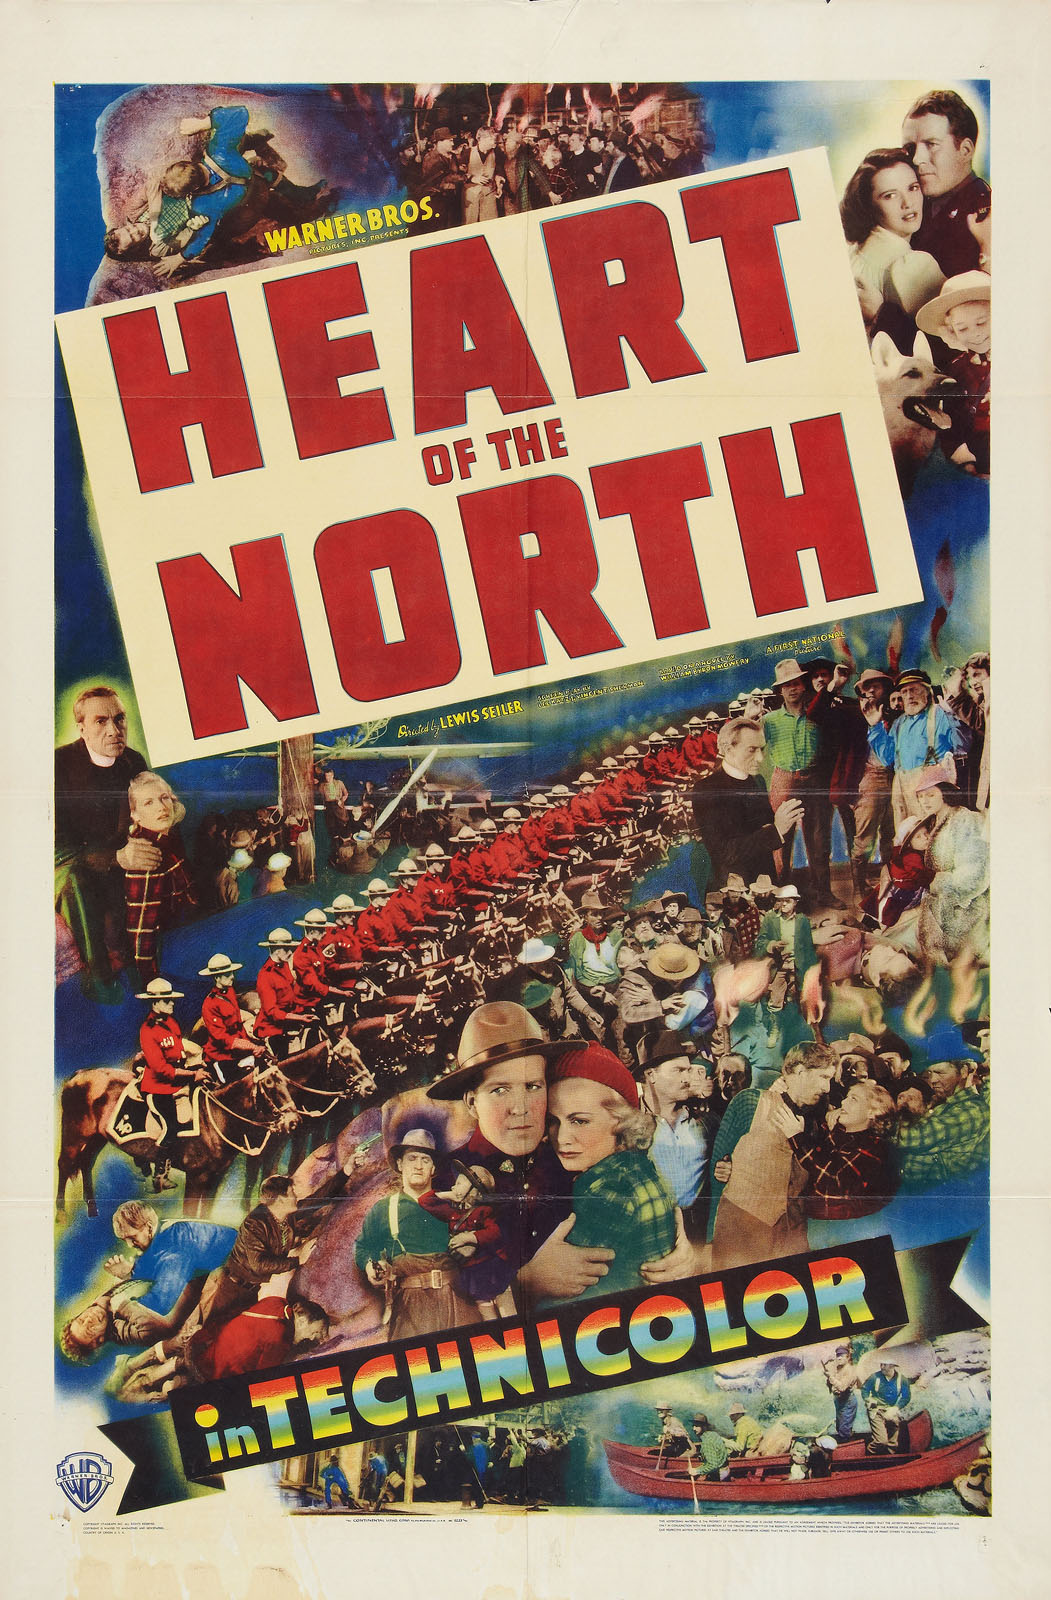 HEART OF THE NORTH